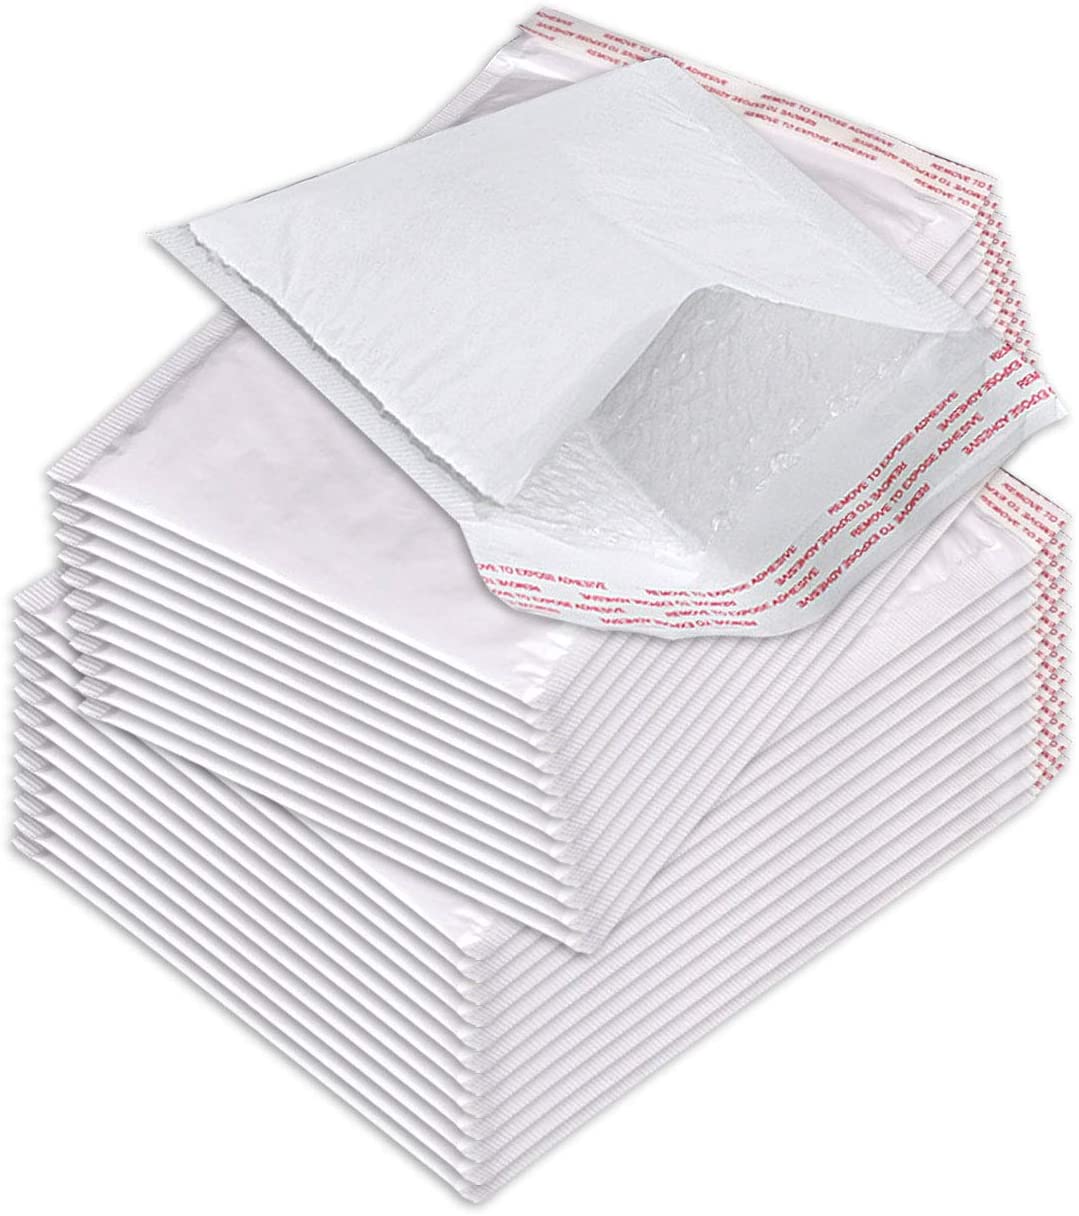 BM Paper 250pcs #0 6x10" Bubble Lined Polyolefin Mailers Padded Envelopes